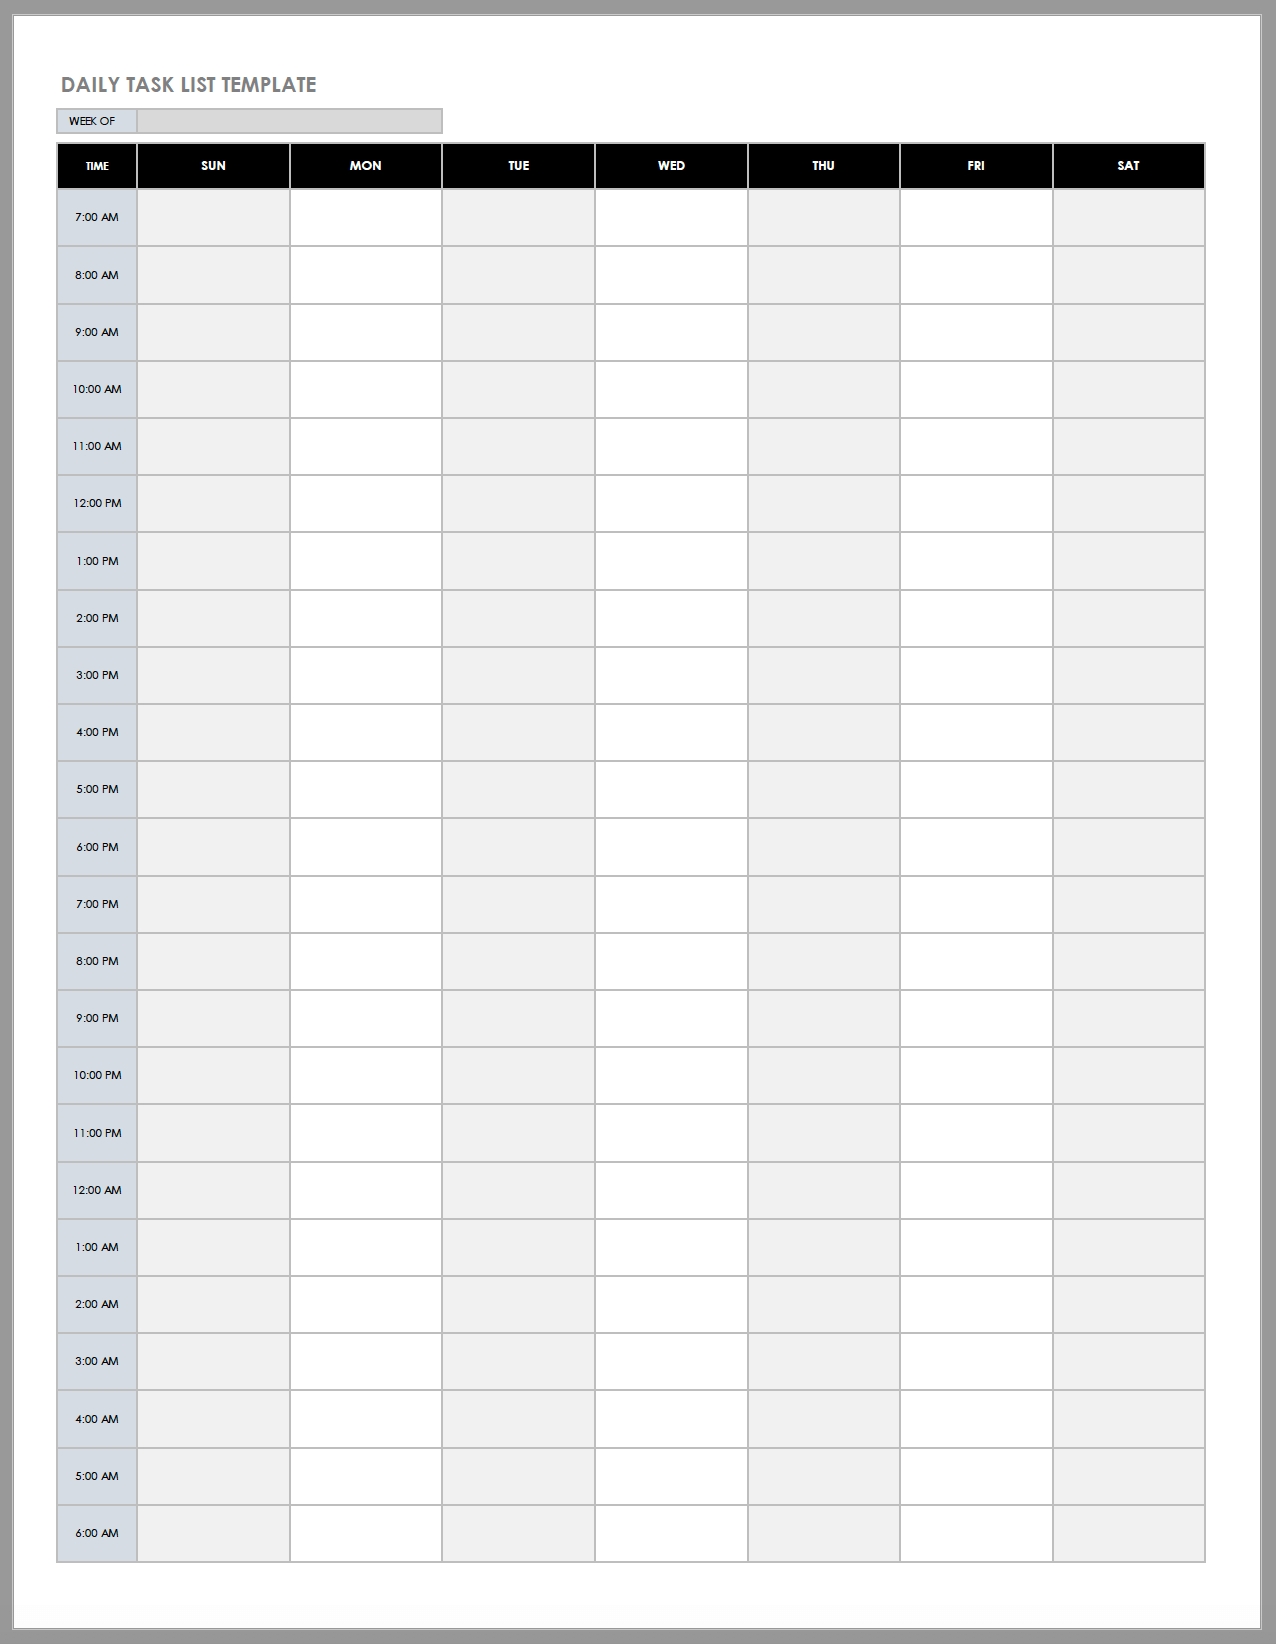 Free Daily Work Schedule Templates | Smartsheet Calendar Template By Day